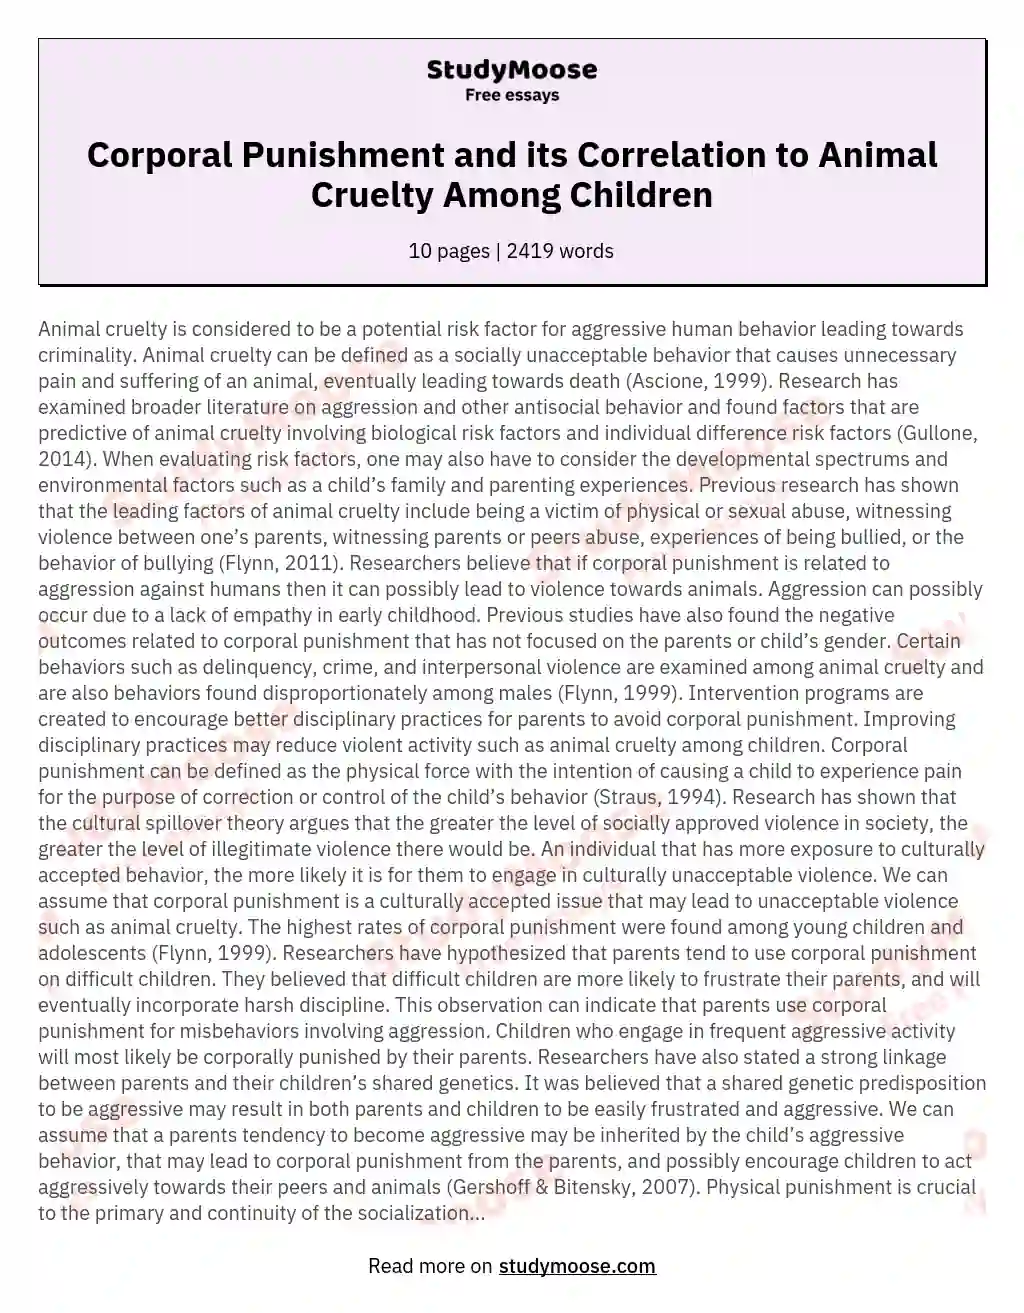 Corporal Punishment and its Correlation to Animal Cruelty Among Children  Free Essay Example